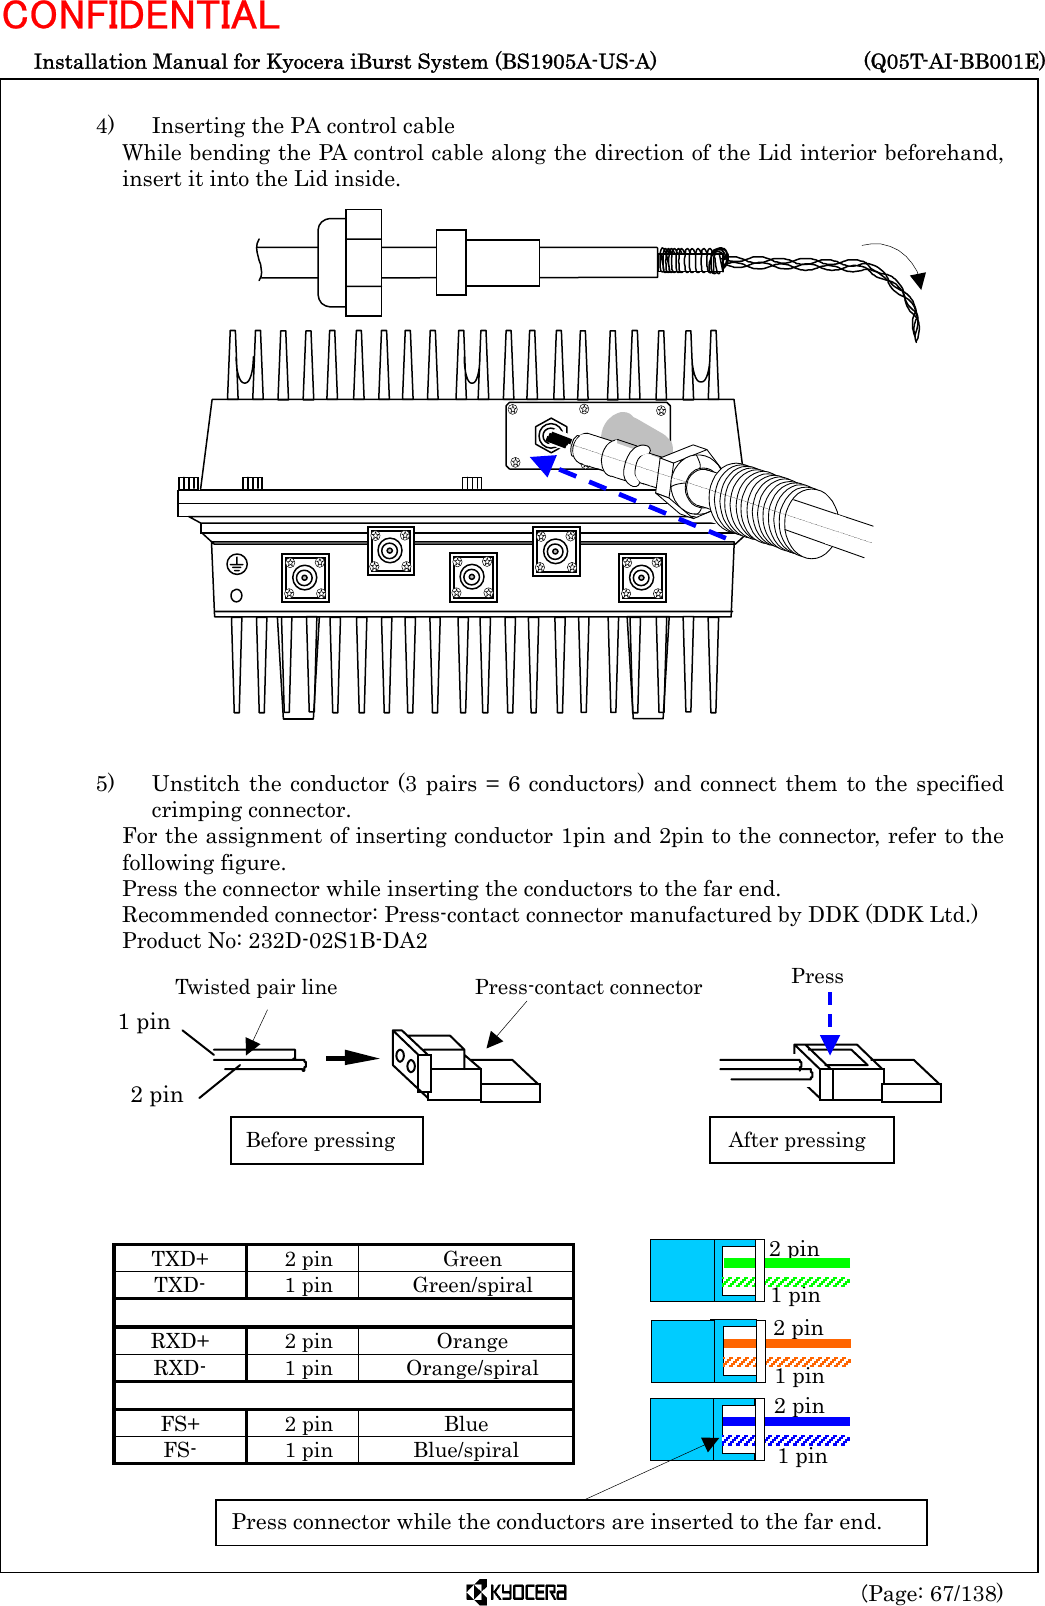  Installation Manual for Kyocera iBurst System (BS1905A-US-A)     (Q05T-AI-BB001E) (Page: 67/138) CONFIDENTIAL  4)    Inserting the PA control cable While bending the PA control cable along the direction of the Lid interior beforehand, insert it into the Lid inside.                       5)   Unstitch the conductor (3 pairs = 6 conductors) and connect them to the specified crimping connector. For the assignment of inserting conductor 1pin and 2pin to the connector, refer to the following figure. Press the connector while inserting the conductors to the far end. Recommended connector: Press-contact connector manufactured by DDK (DDK Ltd.) Product No: 232D-02S1B-DA2            TXD+ 2 pin  Green TXD- 1 pin Green/spiral     RXD+ 2 pin  Orange RXD- 1 pin Orange/spiral     FS+ 2 pin  Blue FS- 1 pin Blue/spiral   Twisted pair line Press-contact connector2 pin1 pinBefore pressing After pressingPress     1 pin 2 pin 2 pin 2 pin 1 pin 1 pin Press connector while the conductors are inserted to the far end. 